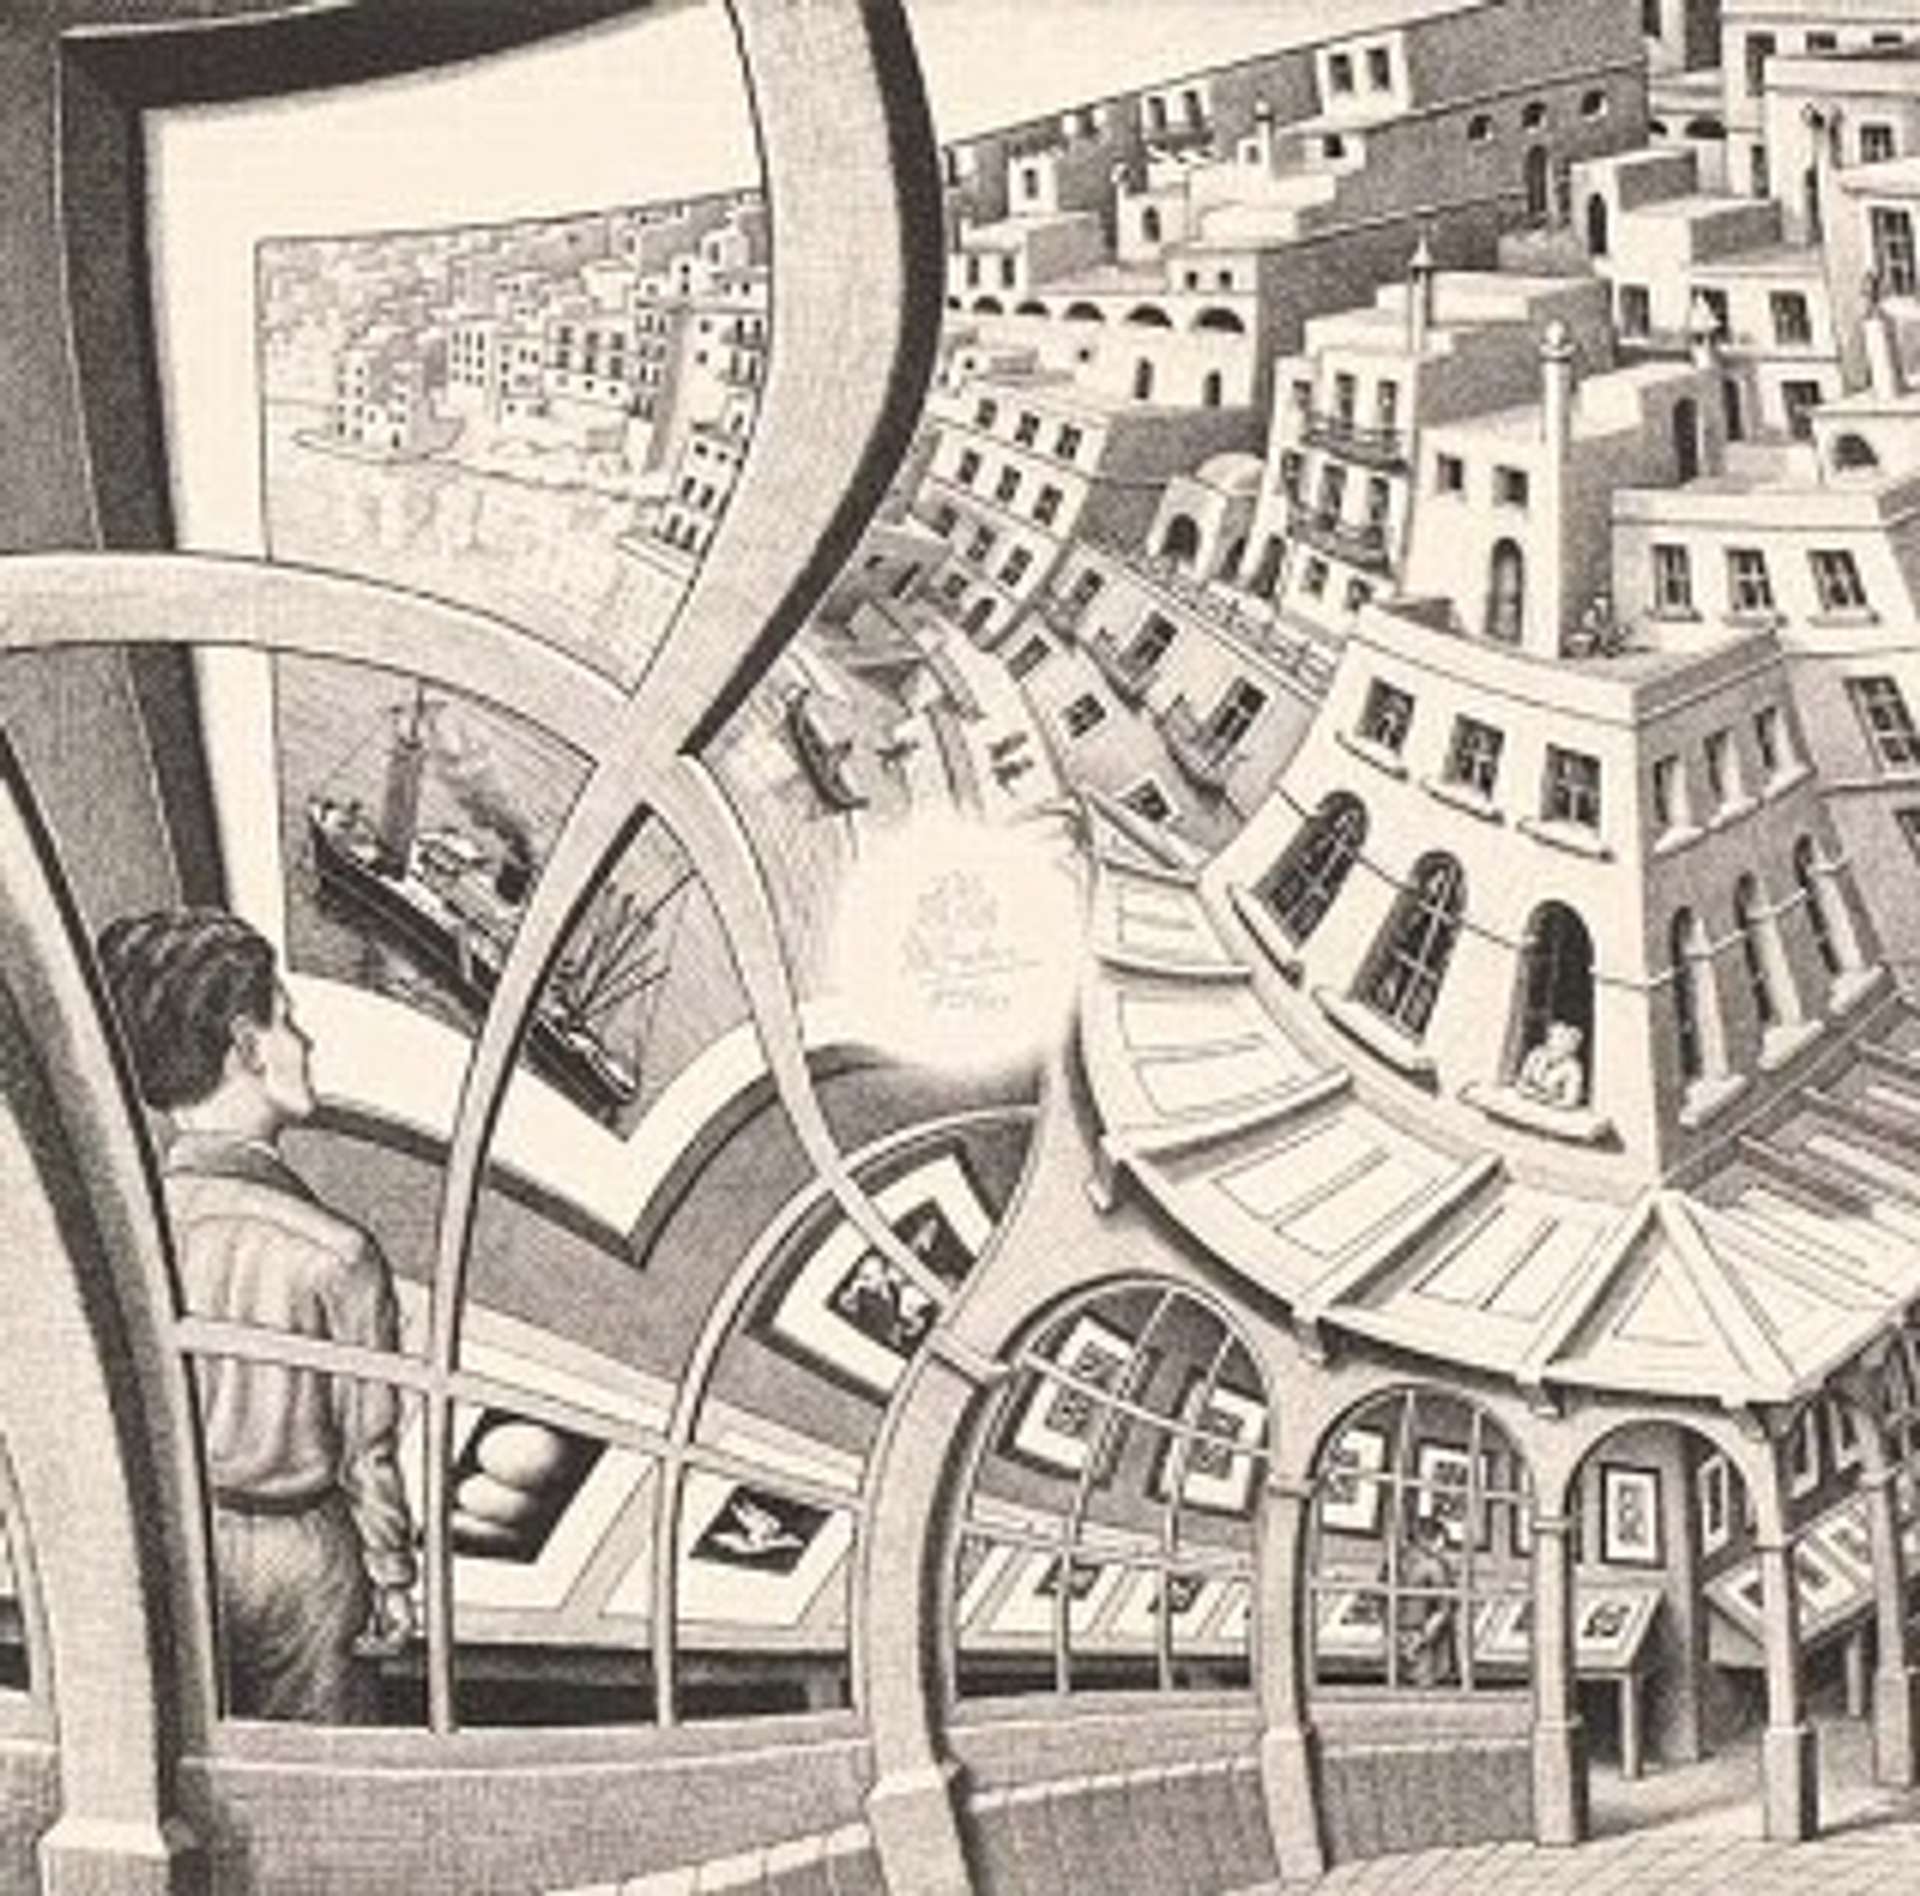 Print Gallery by M. C. Escher. The print shows a distorted perspective of a gallery with pictures hanging.